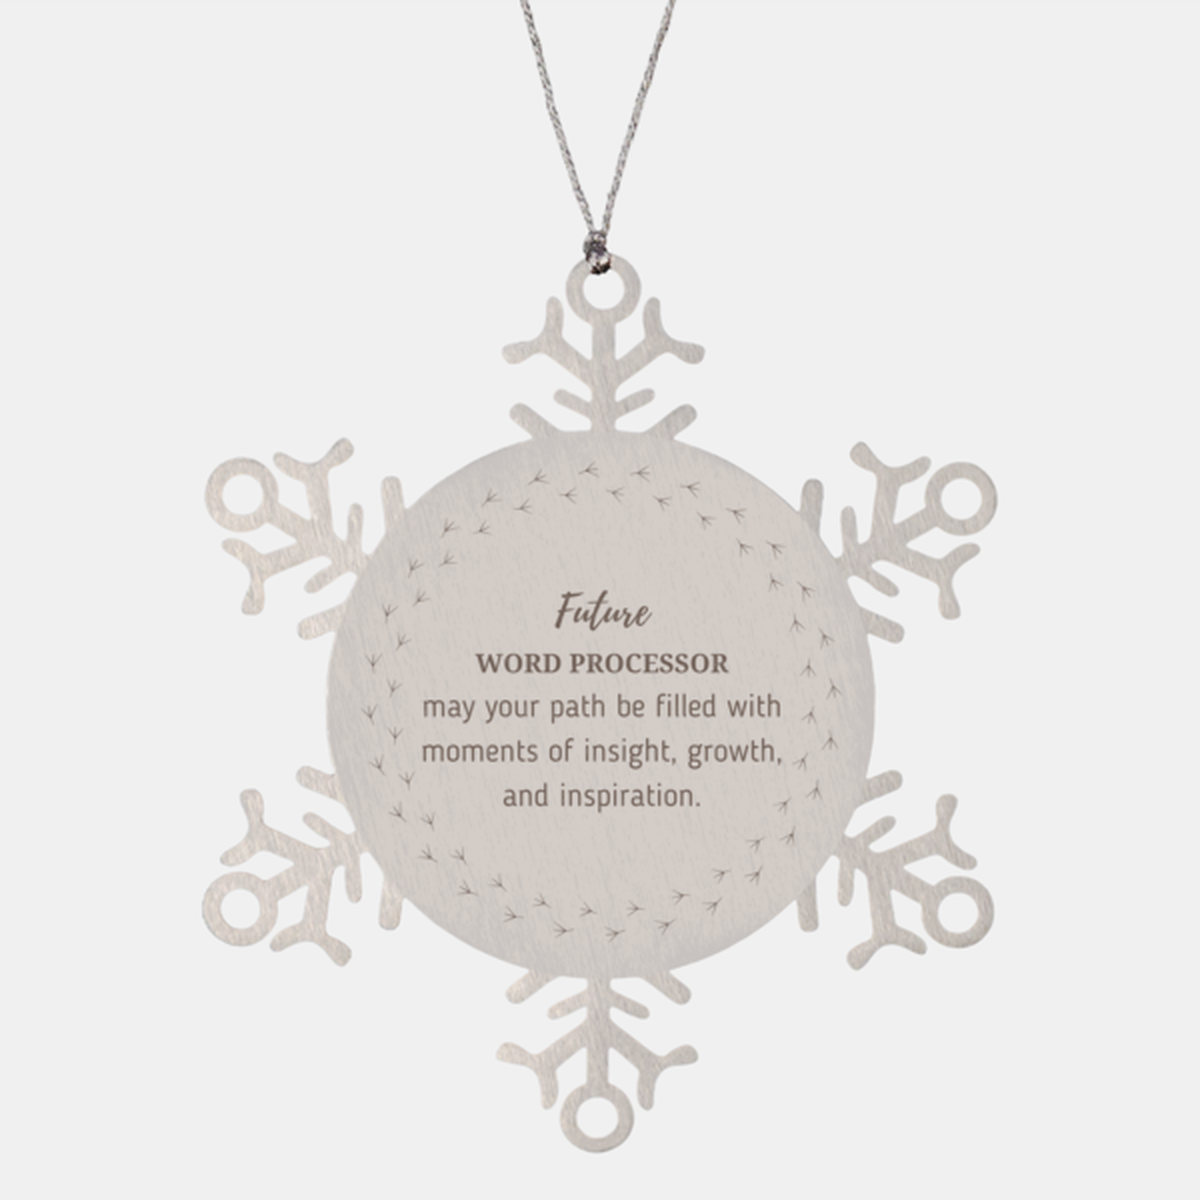 Future Word Processor Gifts, May your path be filled with moments of insight, Graduation Gifts for New Word Processor, Christmas Unique Snowflake Ornament For Men, Women, Friends